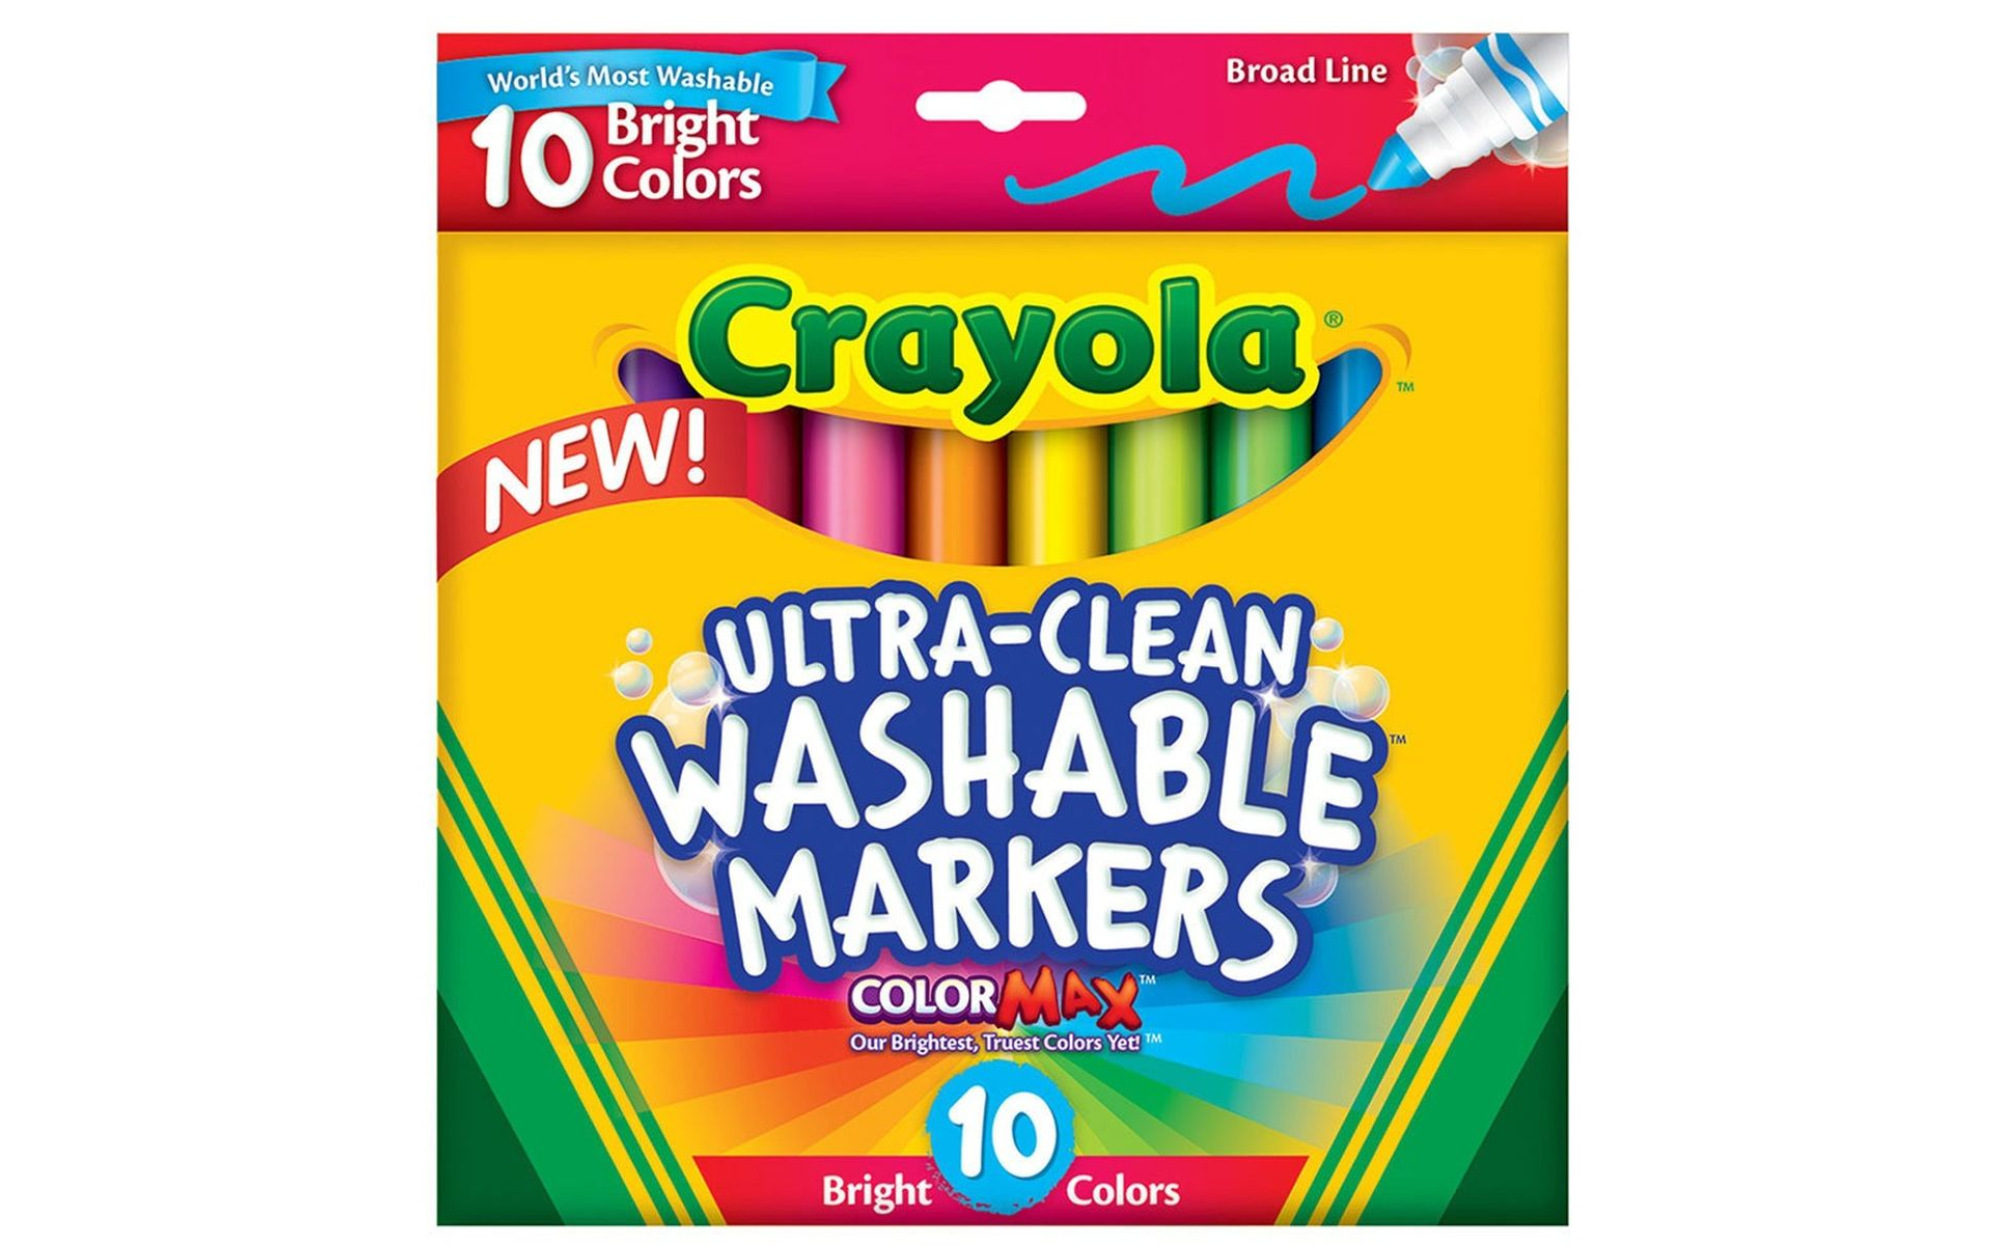 Crayola Ultra-Clean Washable Marker Color Max - sets of 12 - Fine